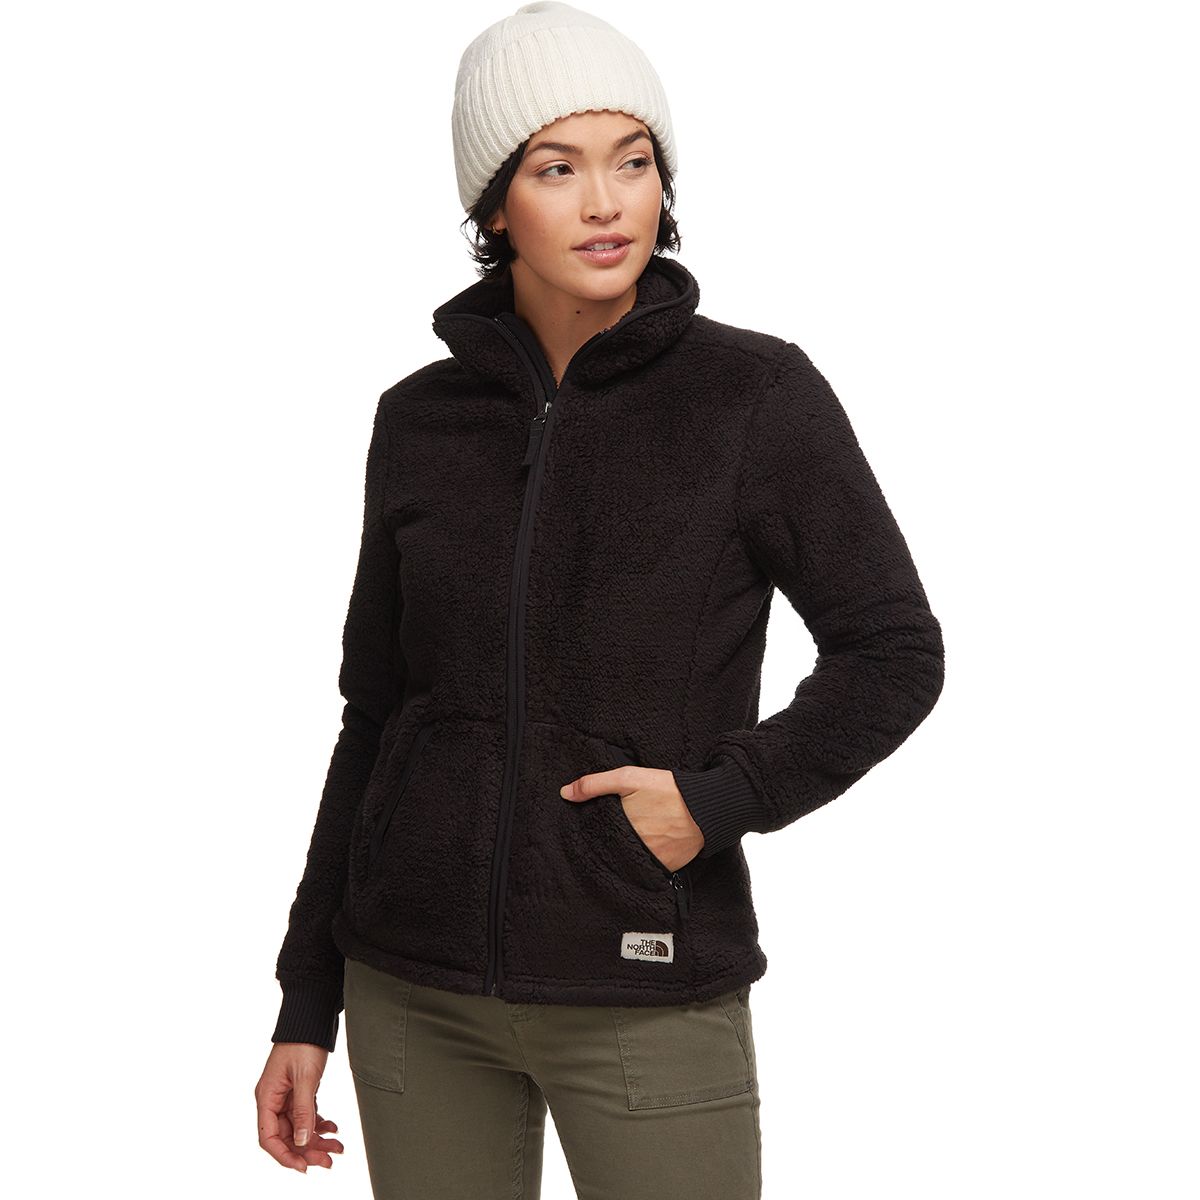 The North Face Campshire Full-Zip Fleece Jacket - Women's